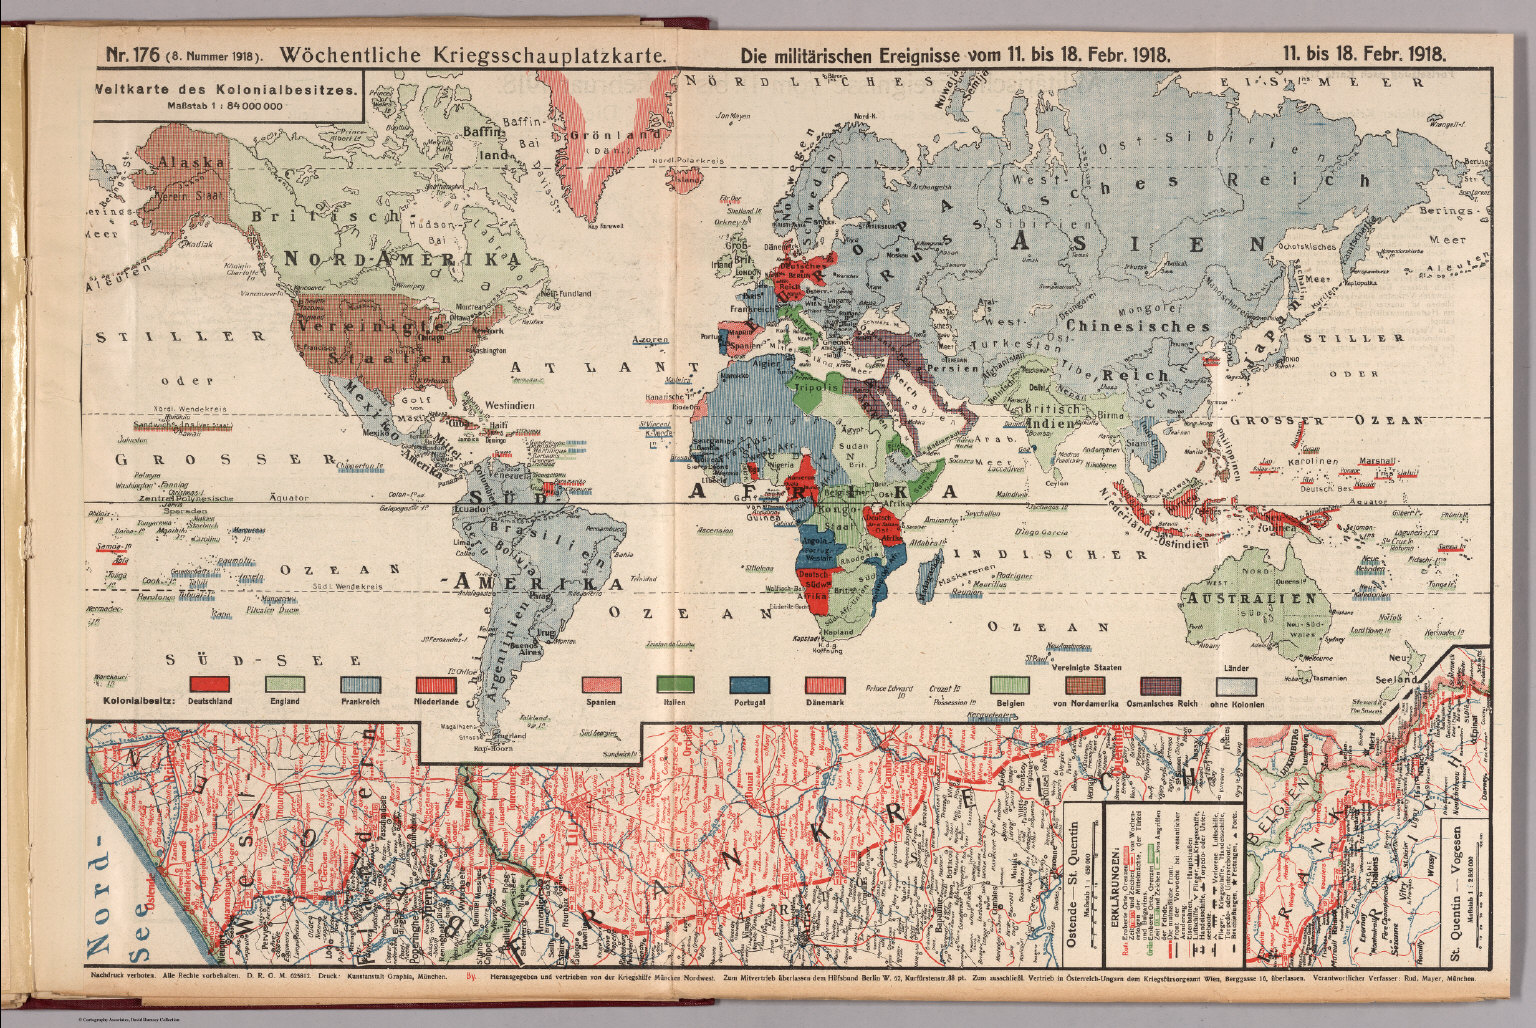 World War I Map (German), Nr. 176. Military Events to February 18